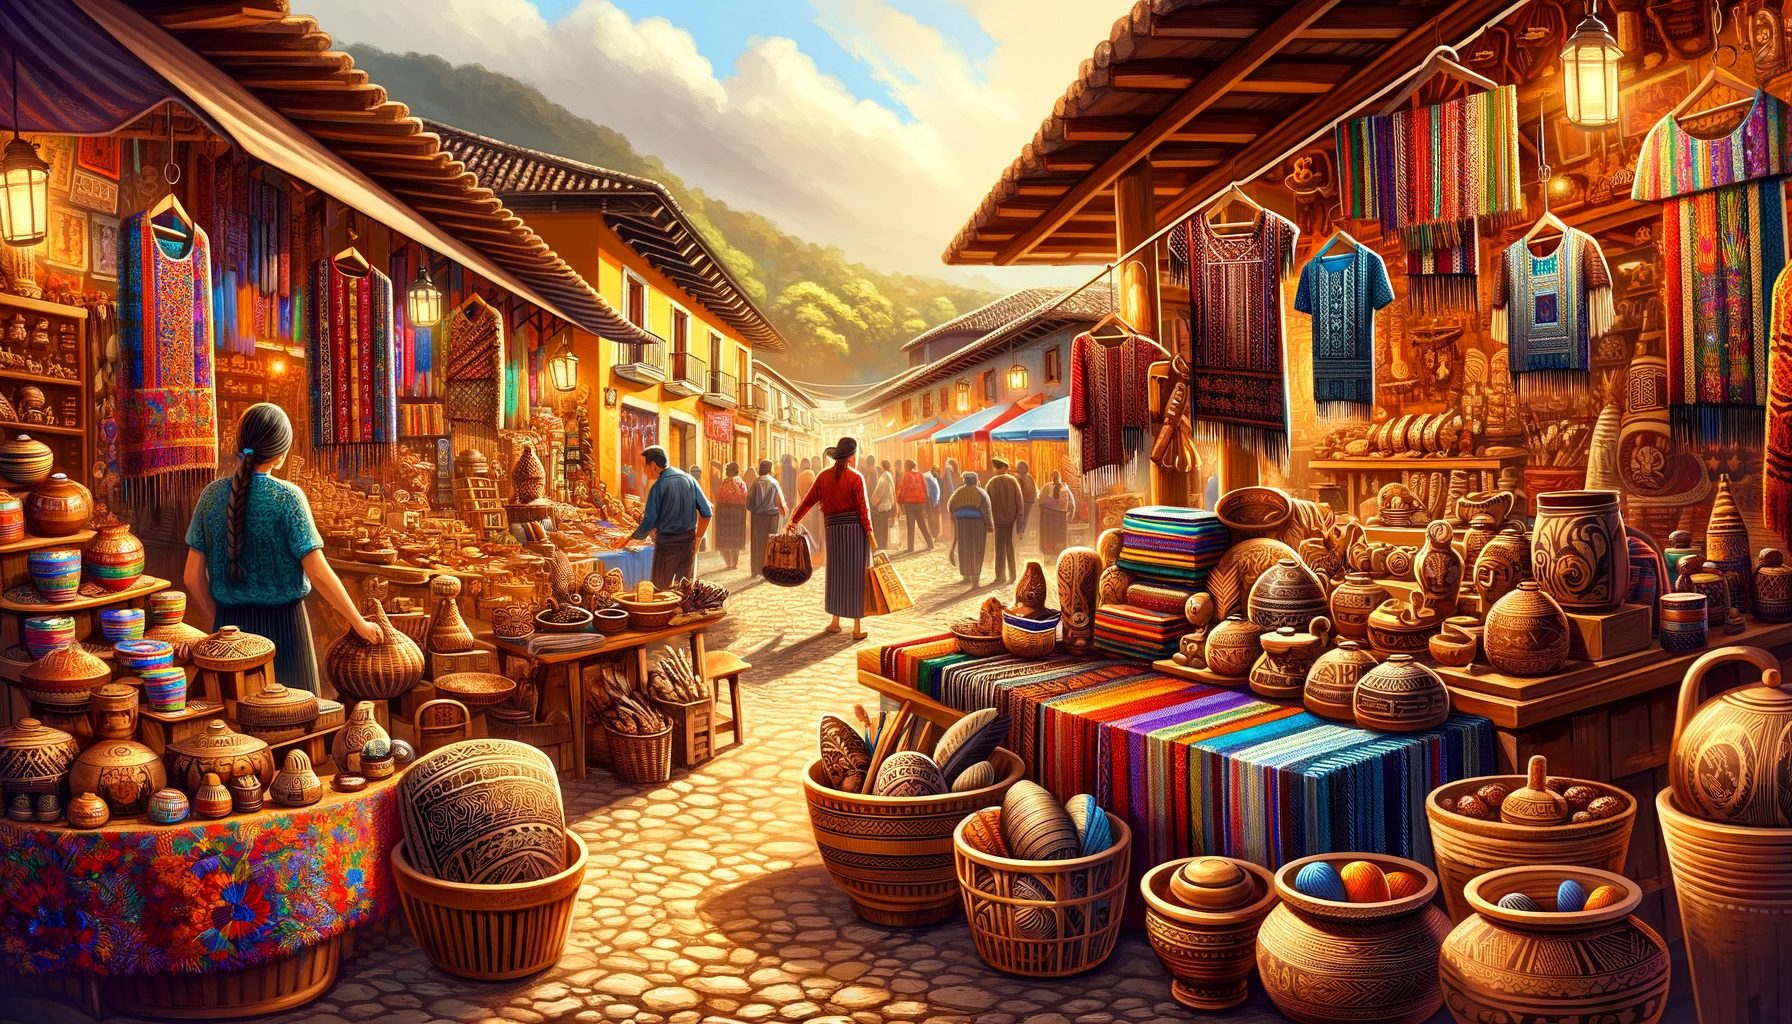 Colorful traditional market with crafts and textiles.